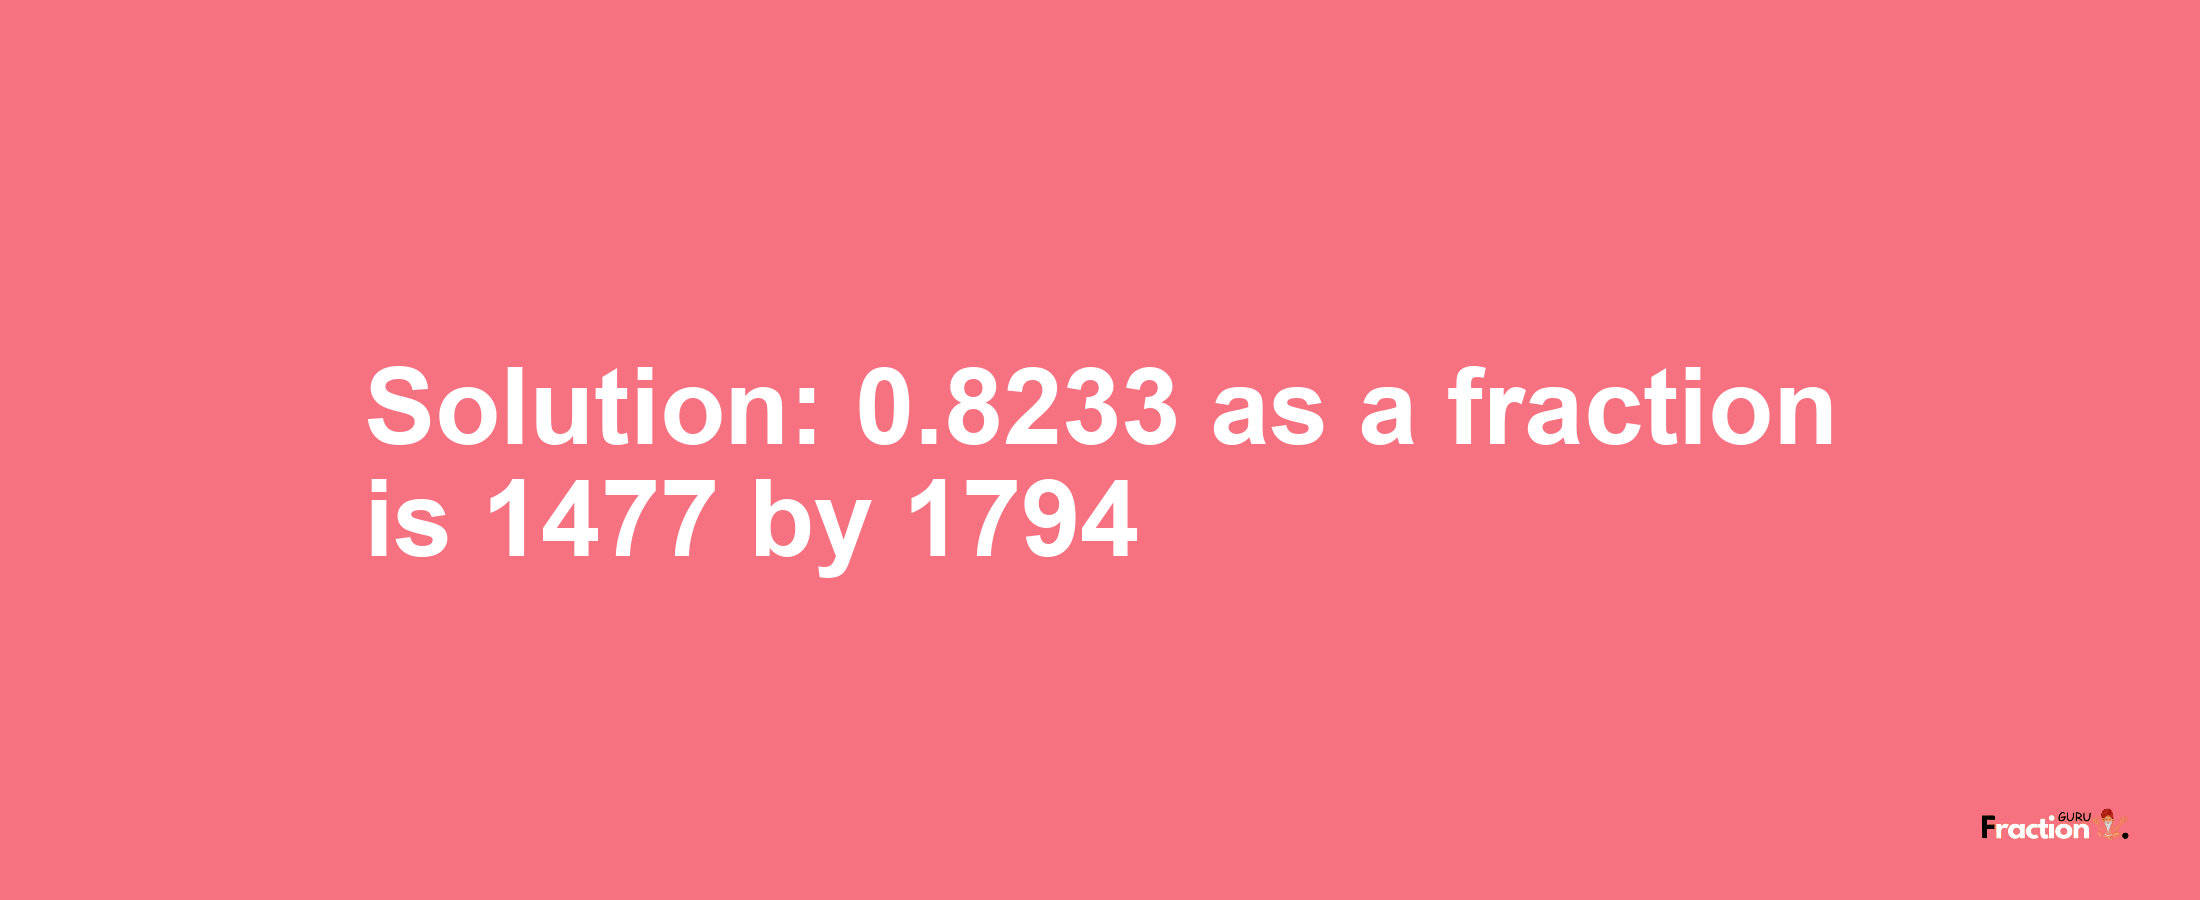 Solution:0.8233 as a fraction is 1477/1794